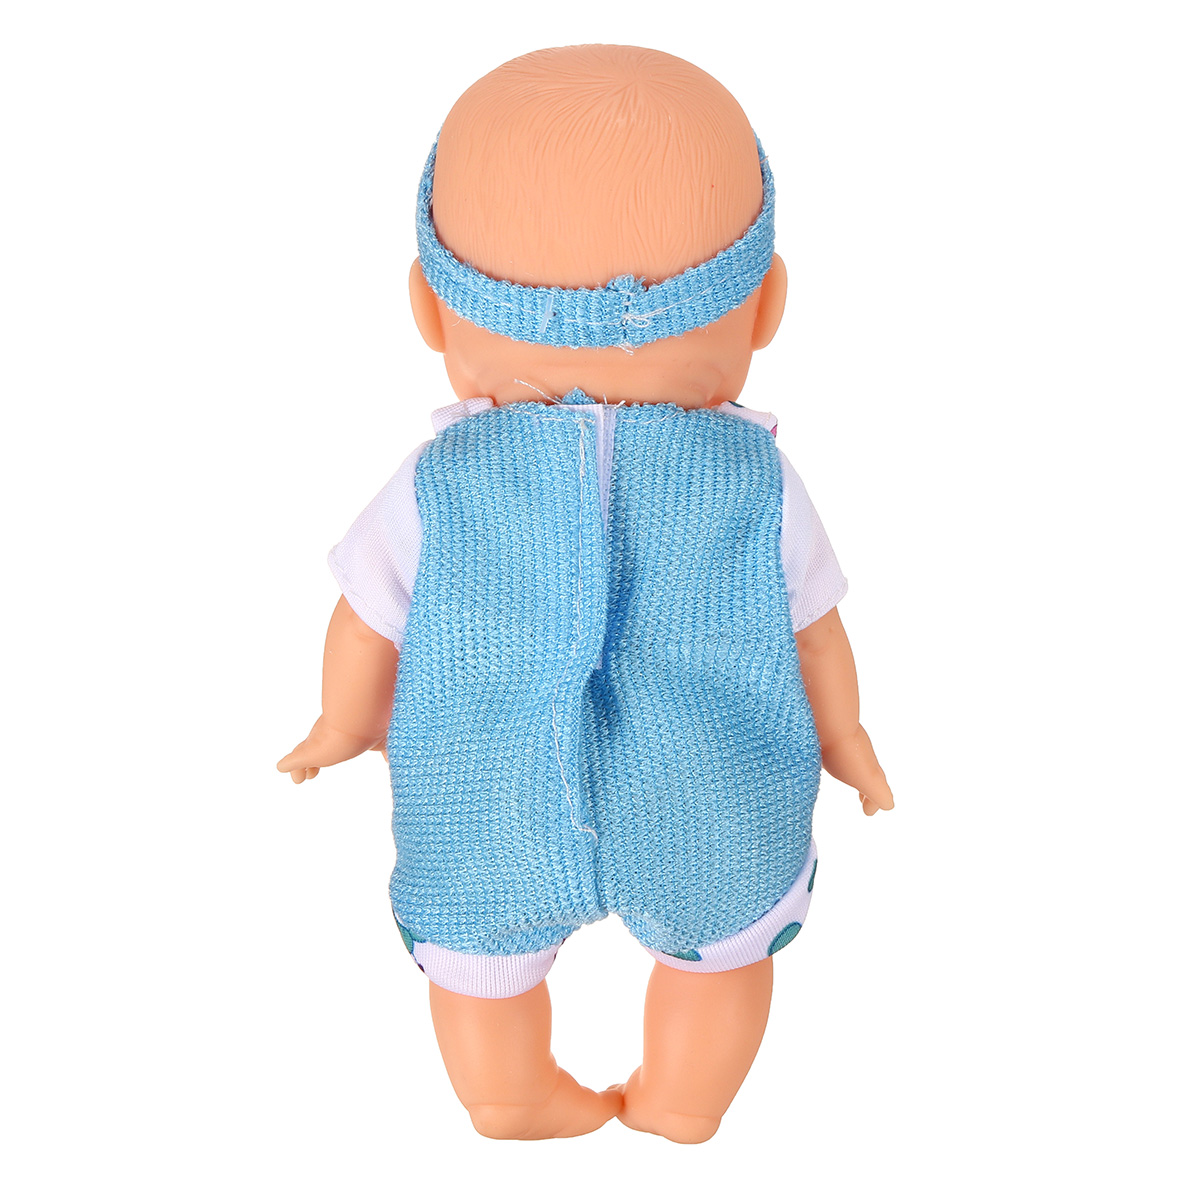 Simulation-Baby-3D-Creative-Cute-Doll-Play-House-Toy-Doll-Vinyl-Doll-Gift-1818655-8